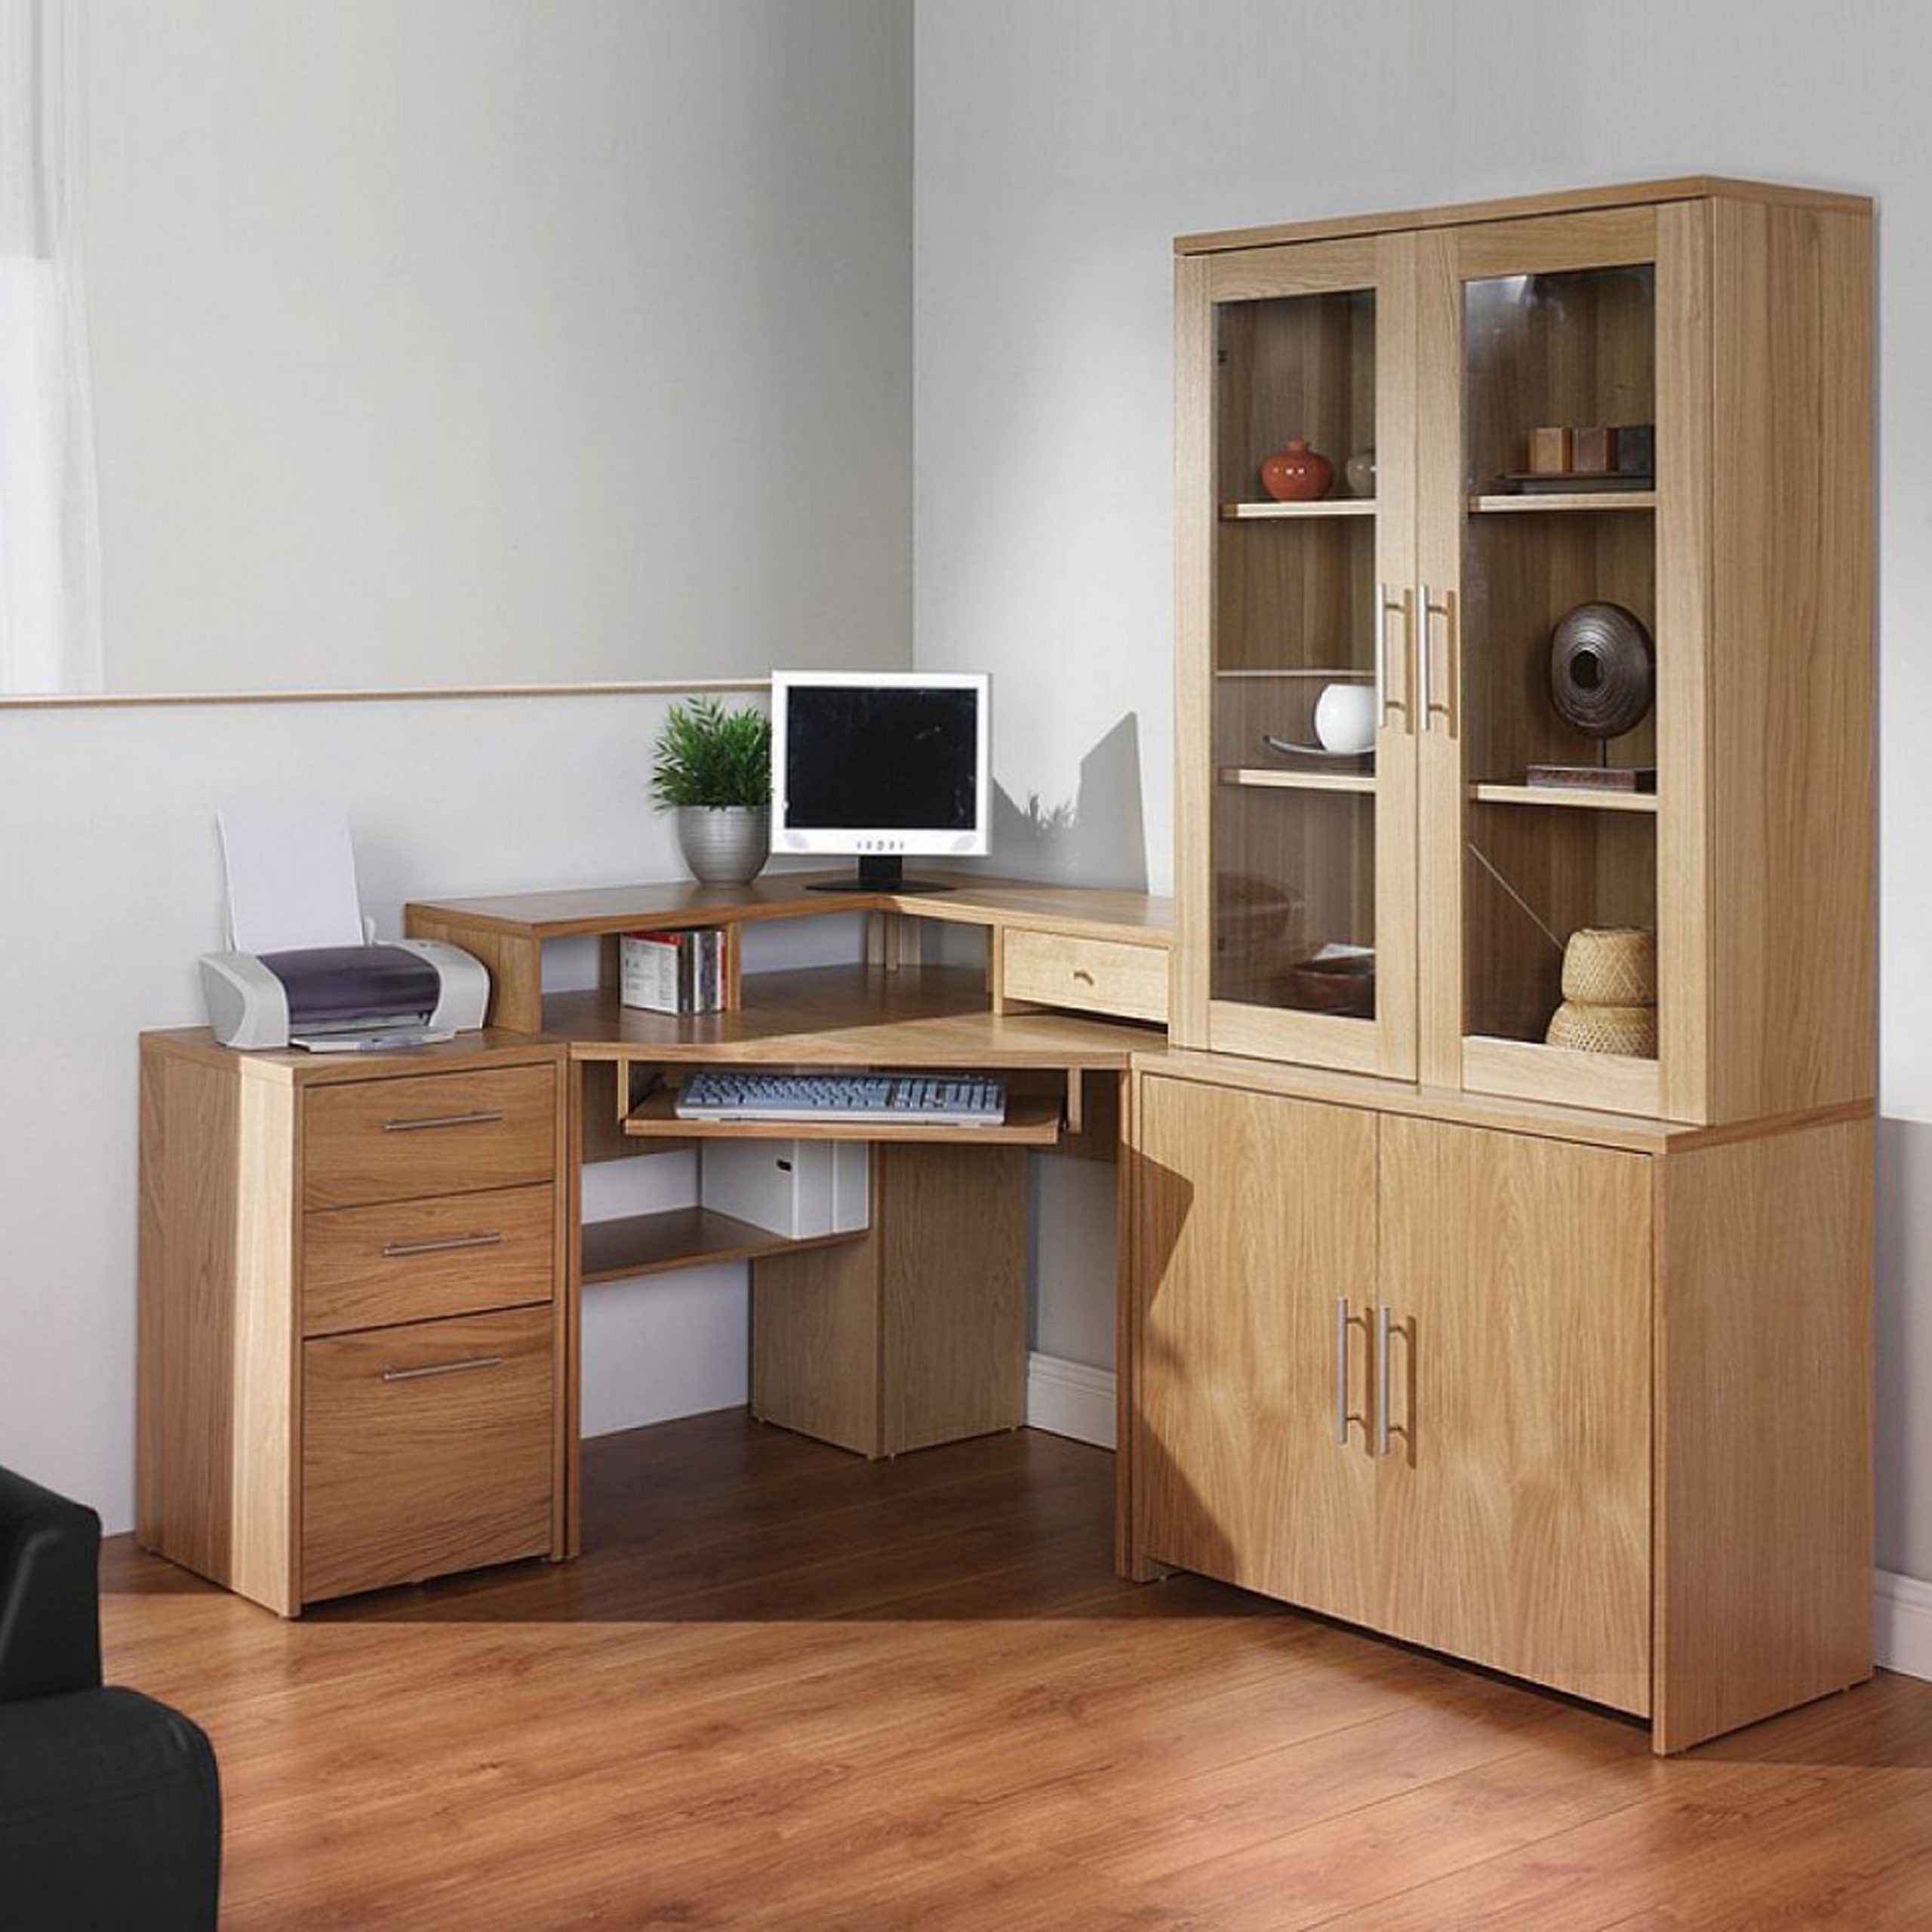 Corner Desk With Shelves Design – Homesfeed Throughout Brown And Yellow Corner Desks (View 12 of 15)